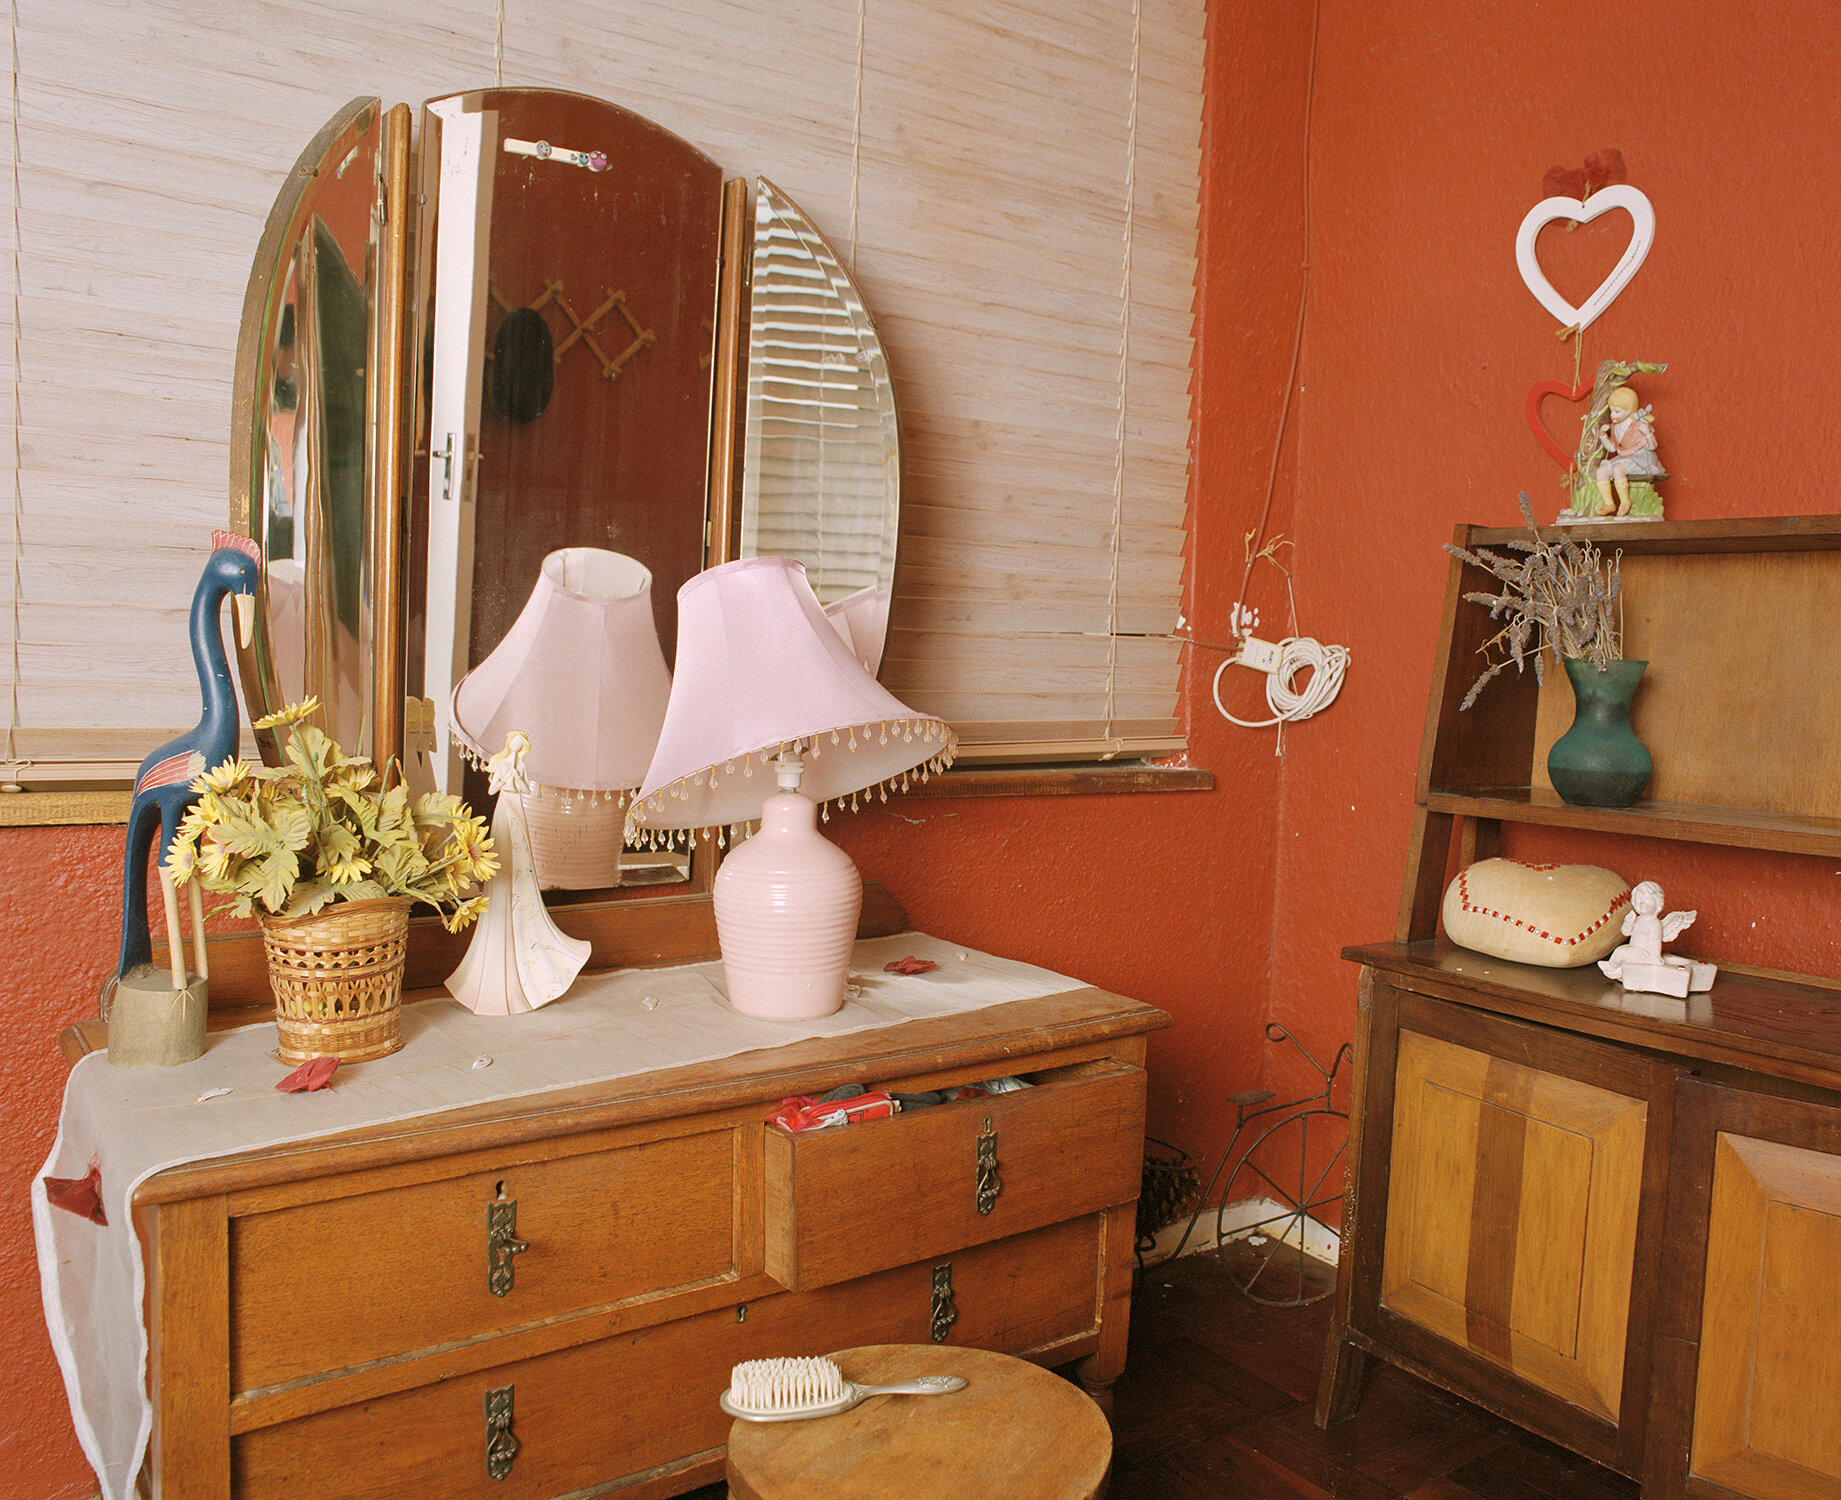  We Have To Leave  This dressing table is in Danwin Jaftha’s home in Milford Road, Plumstead. Danwin was raised by his aunt and uncle who lived in Strawberry Lane before being one of the last to be evicted in 1969 and moving to Lotus River. The image